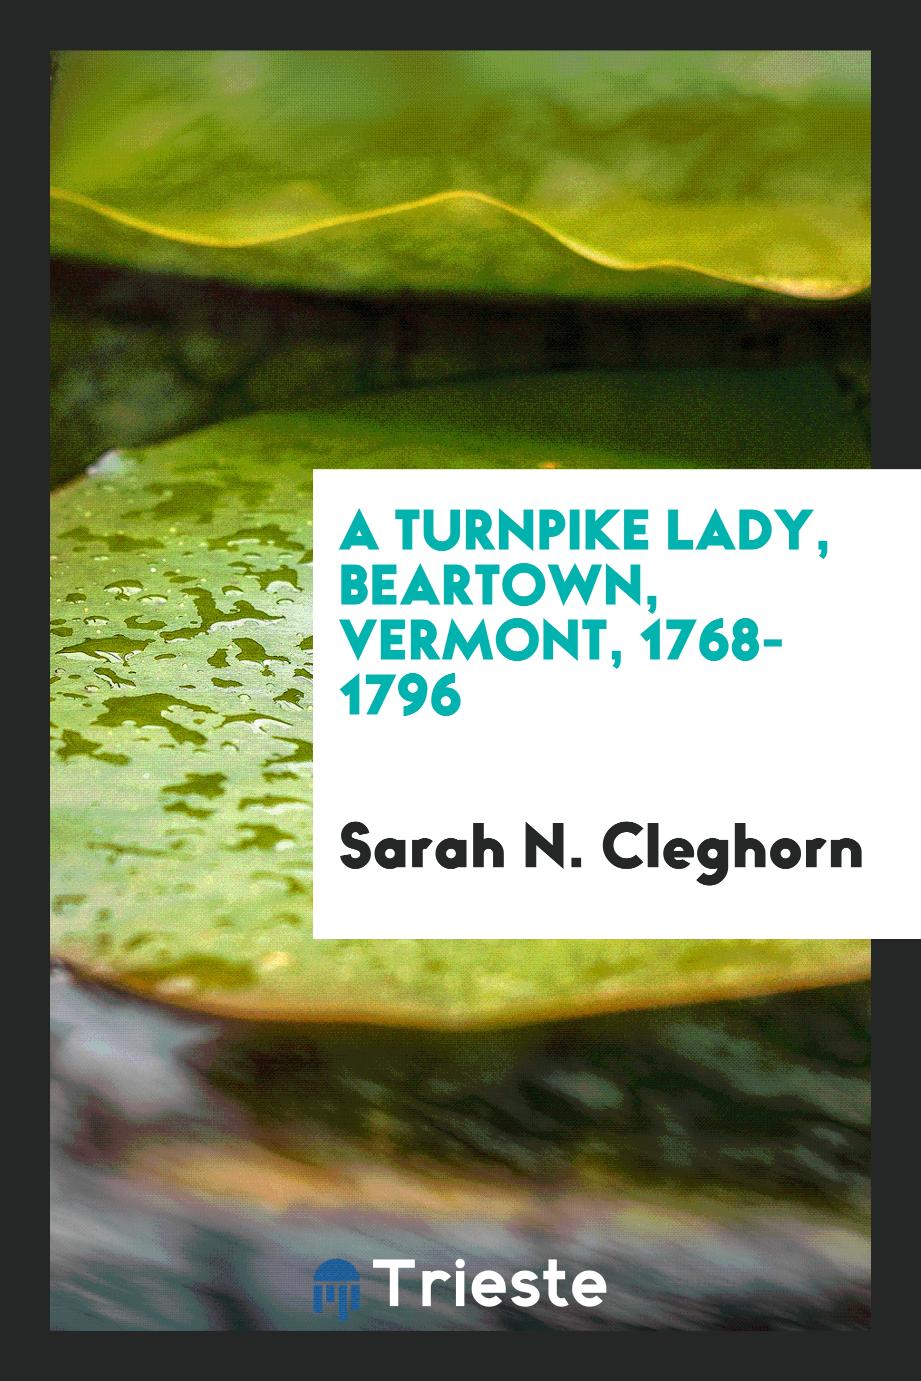 A turnpike lady, Beartown, Vermont, 1768-1796